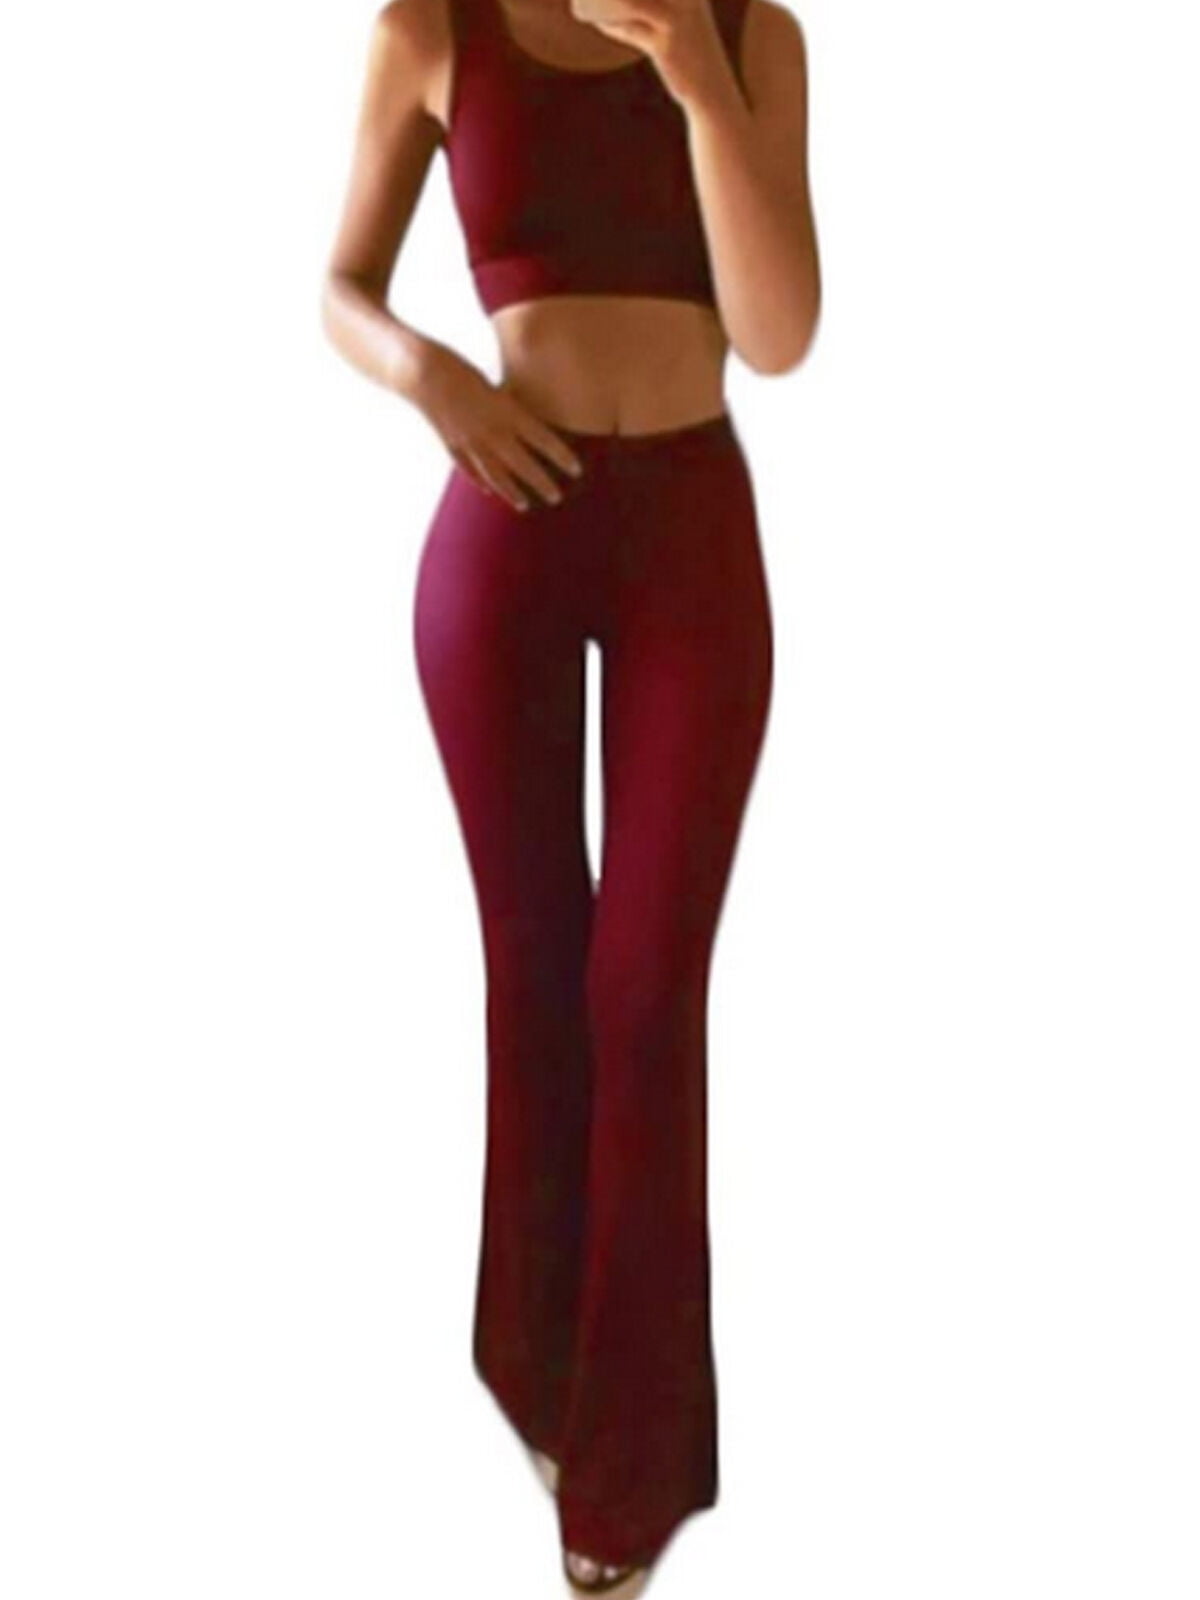 Bell Bottom Yoga Pants For Tall Ladies